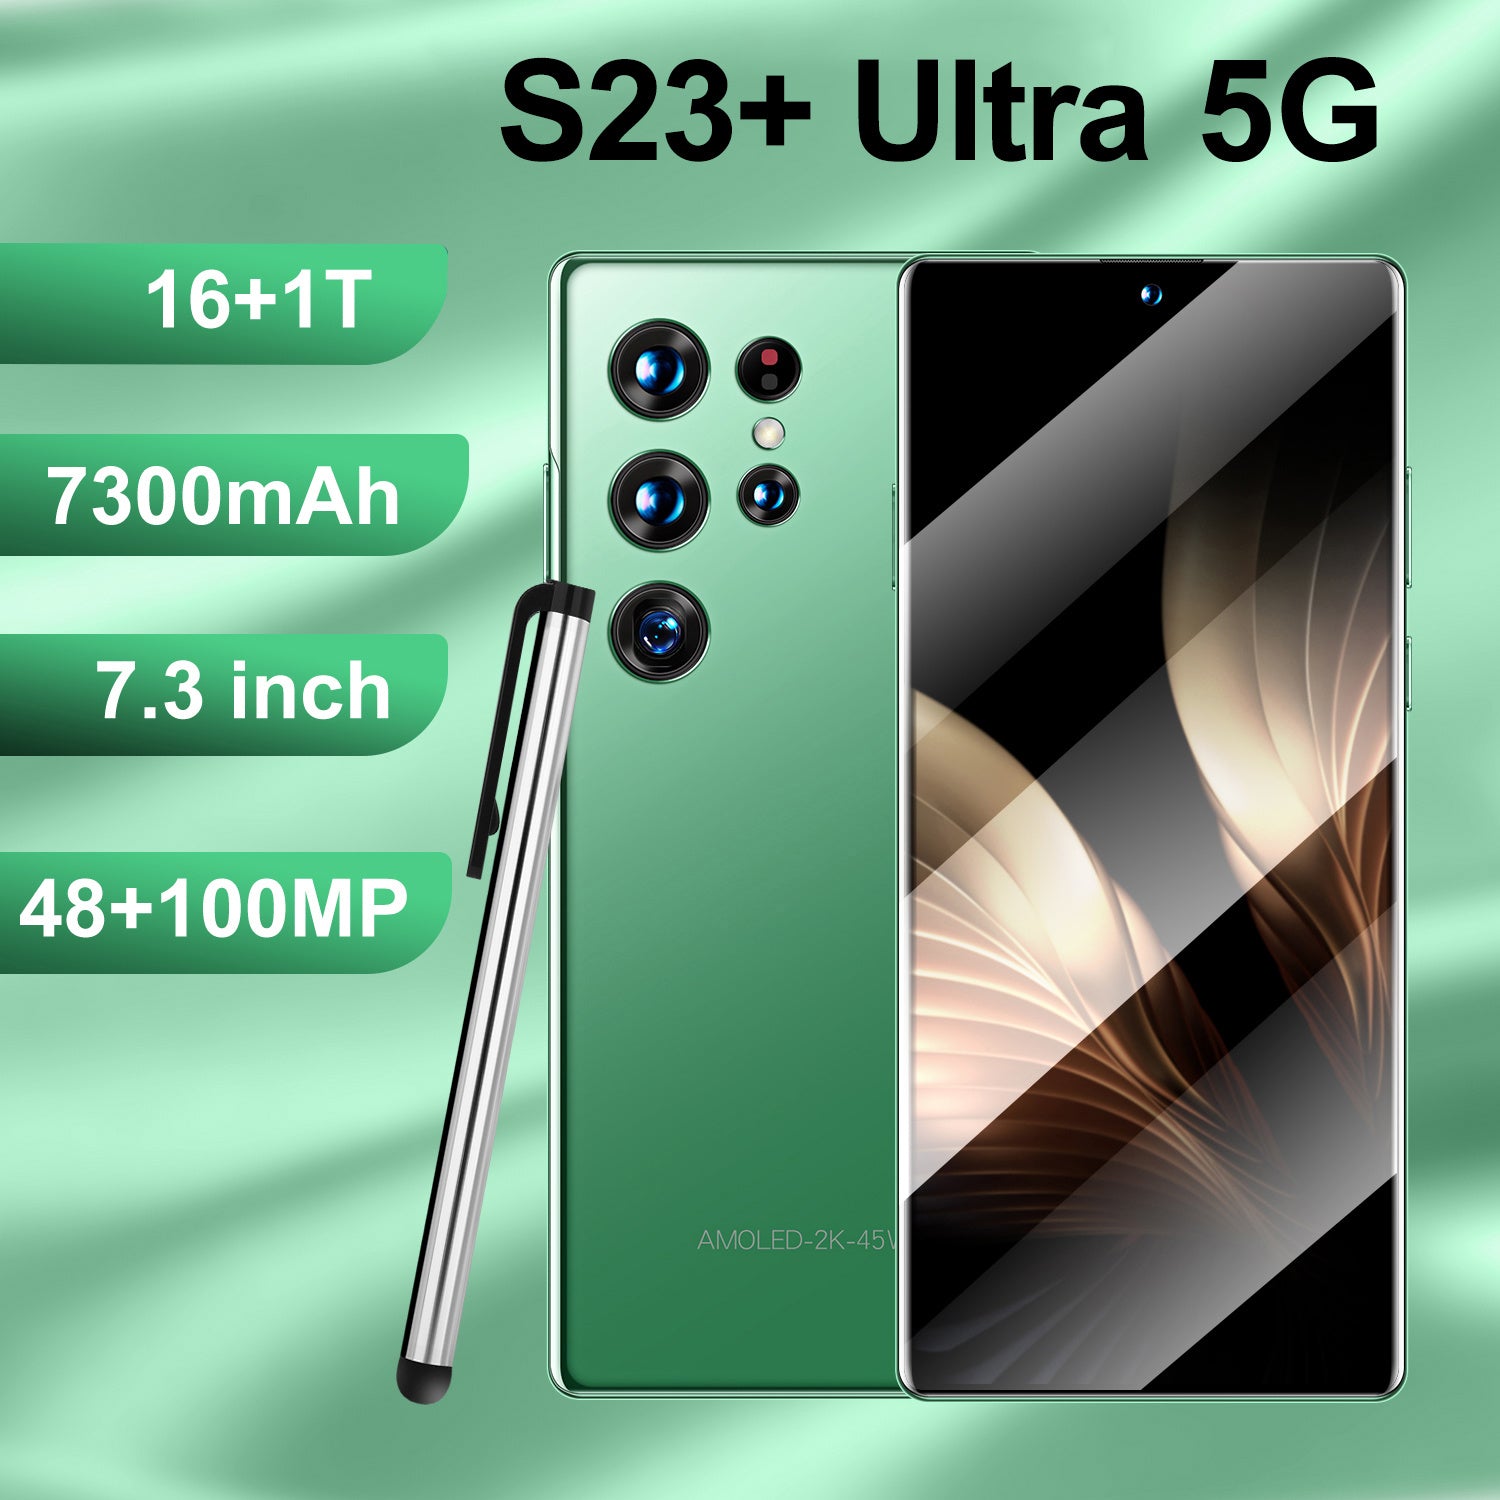 New Smart Cell Phone S23+ Ultra Dual Nano SIM Android Version Ready In Stock